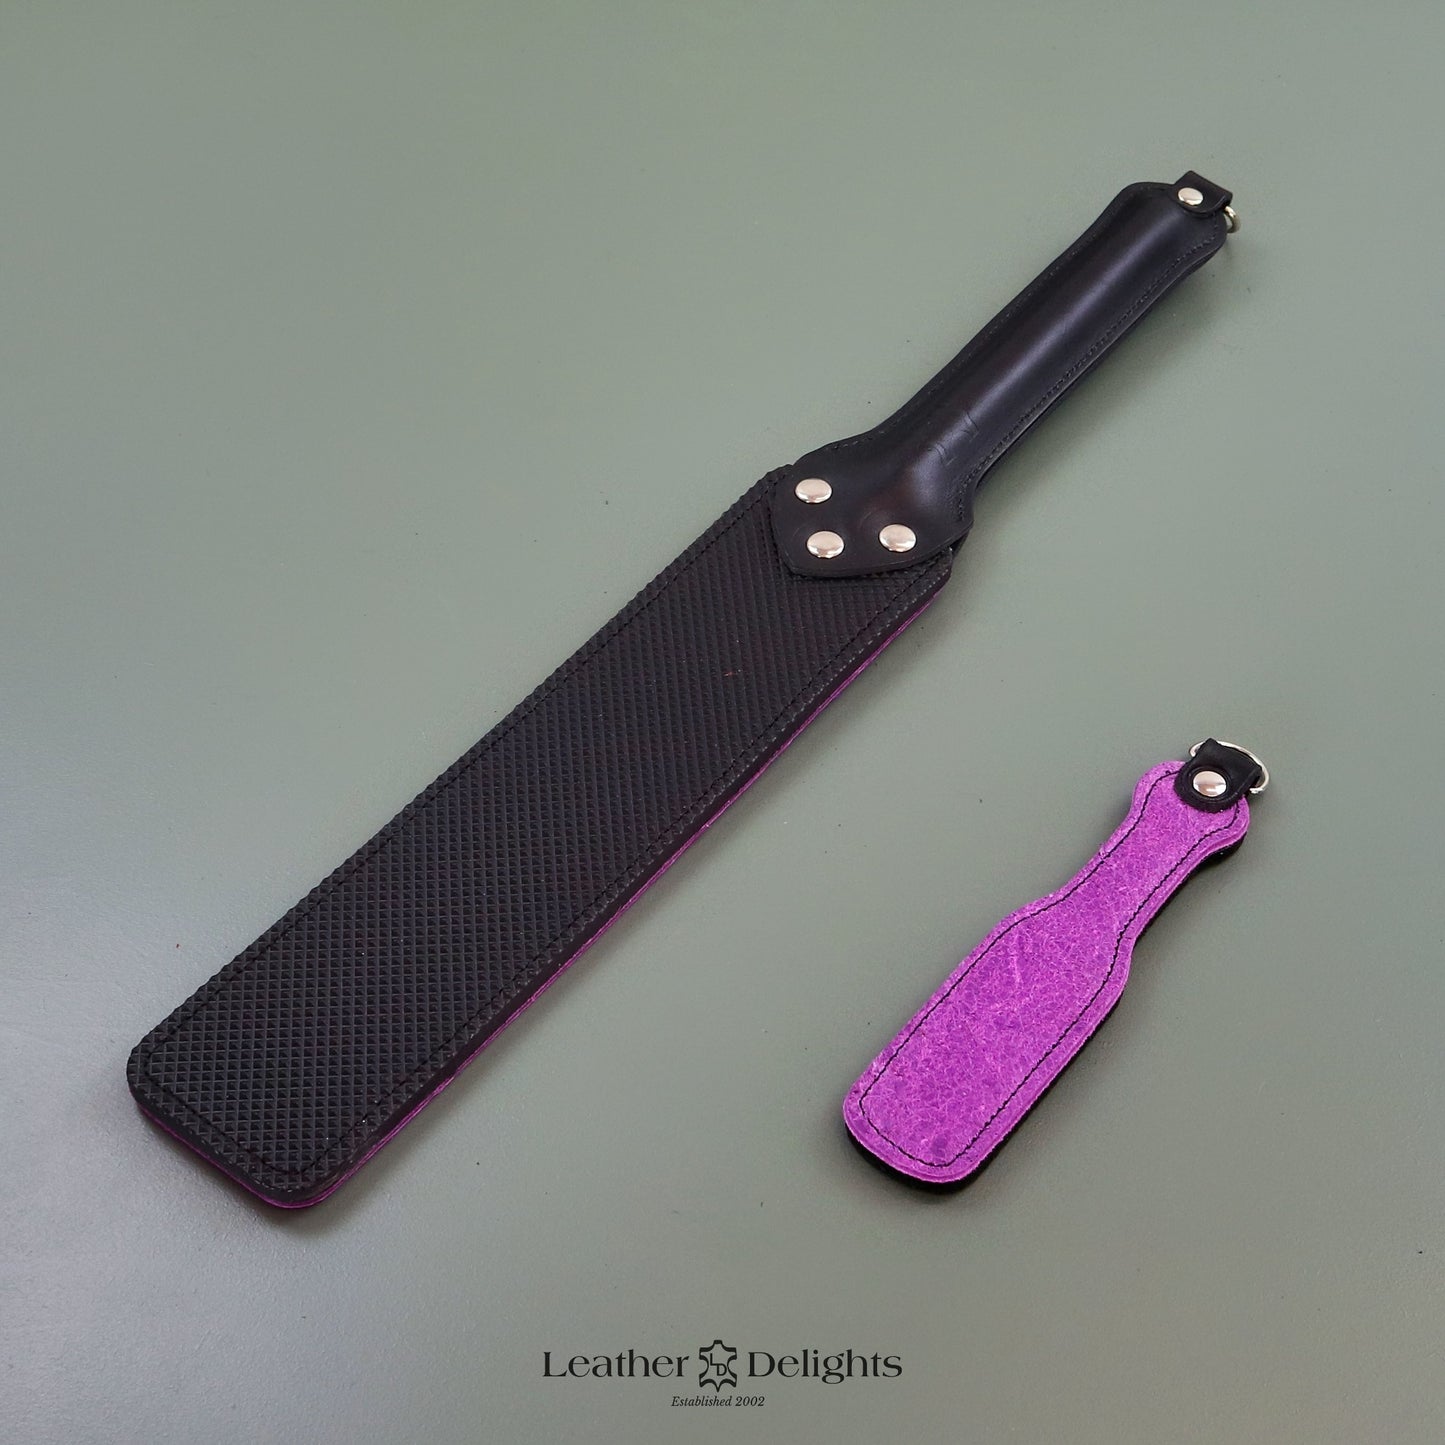 Punishment Paddle - Textured Purple Leather & Dimpled Rubber